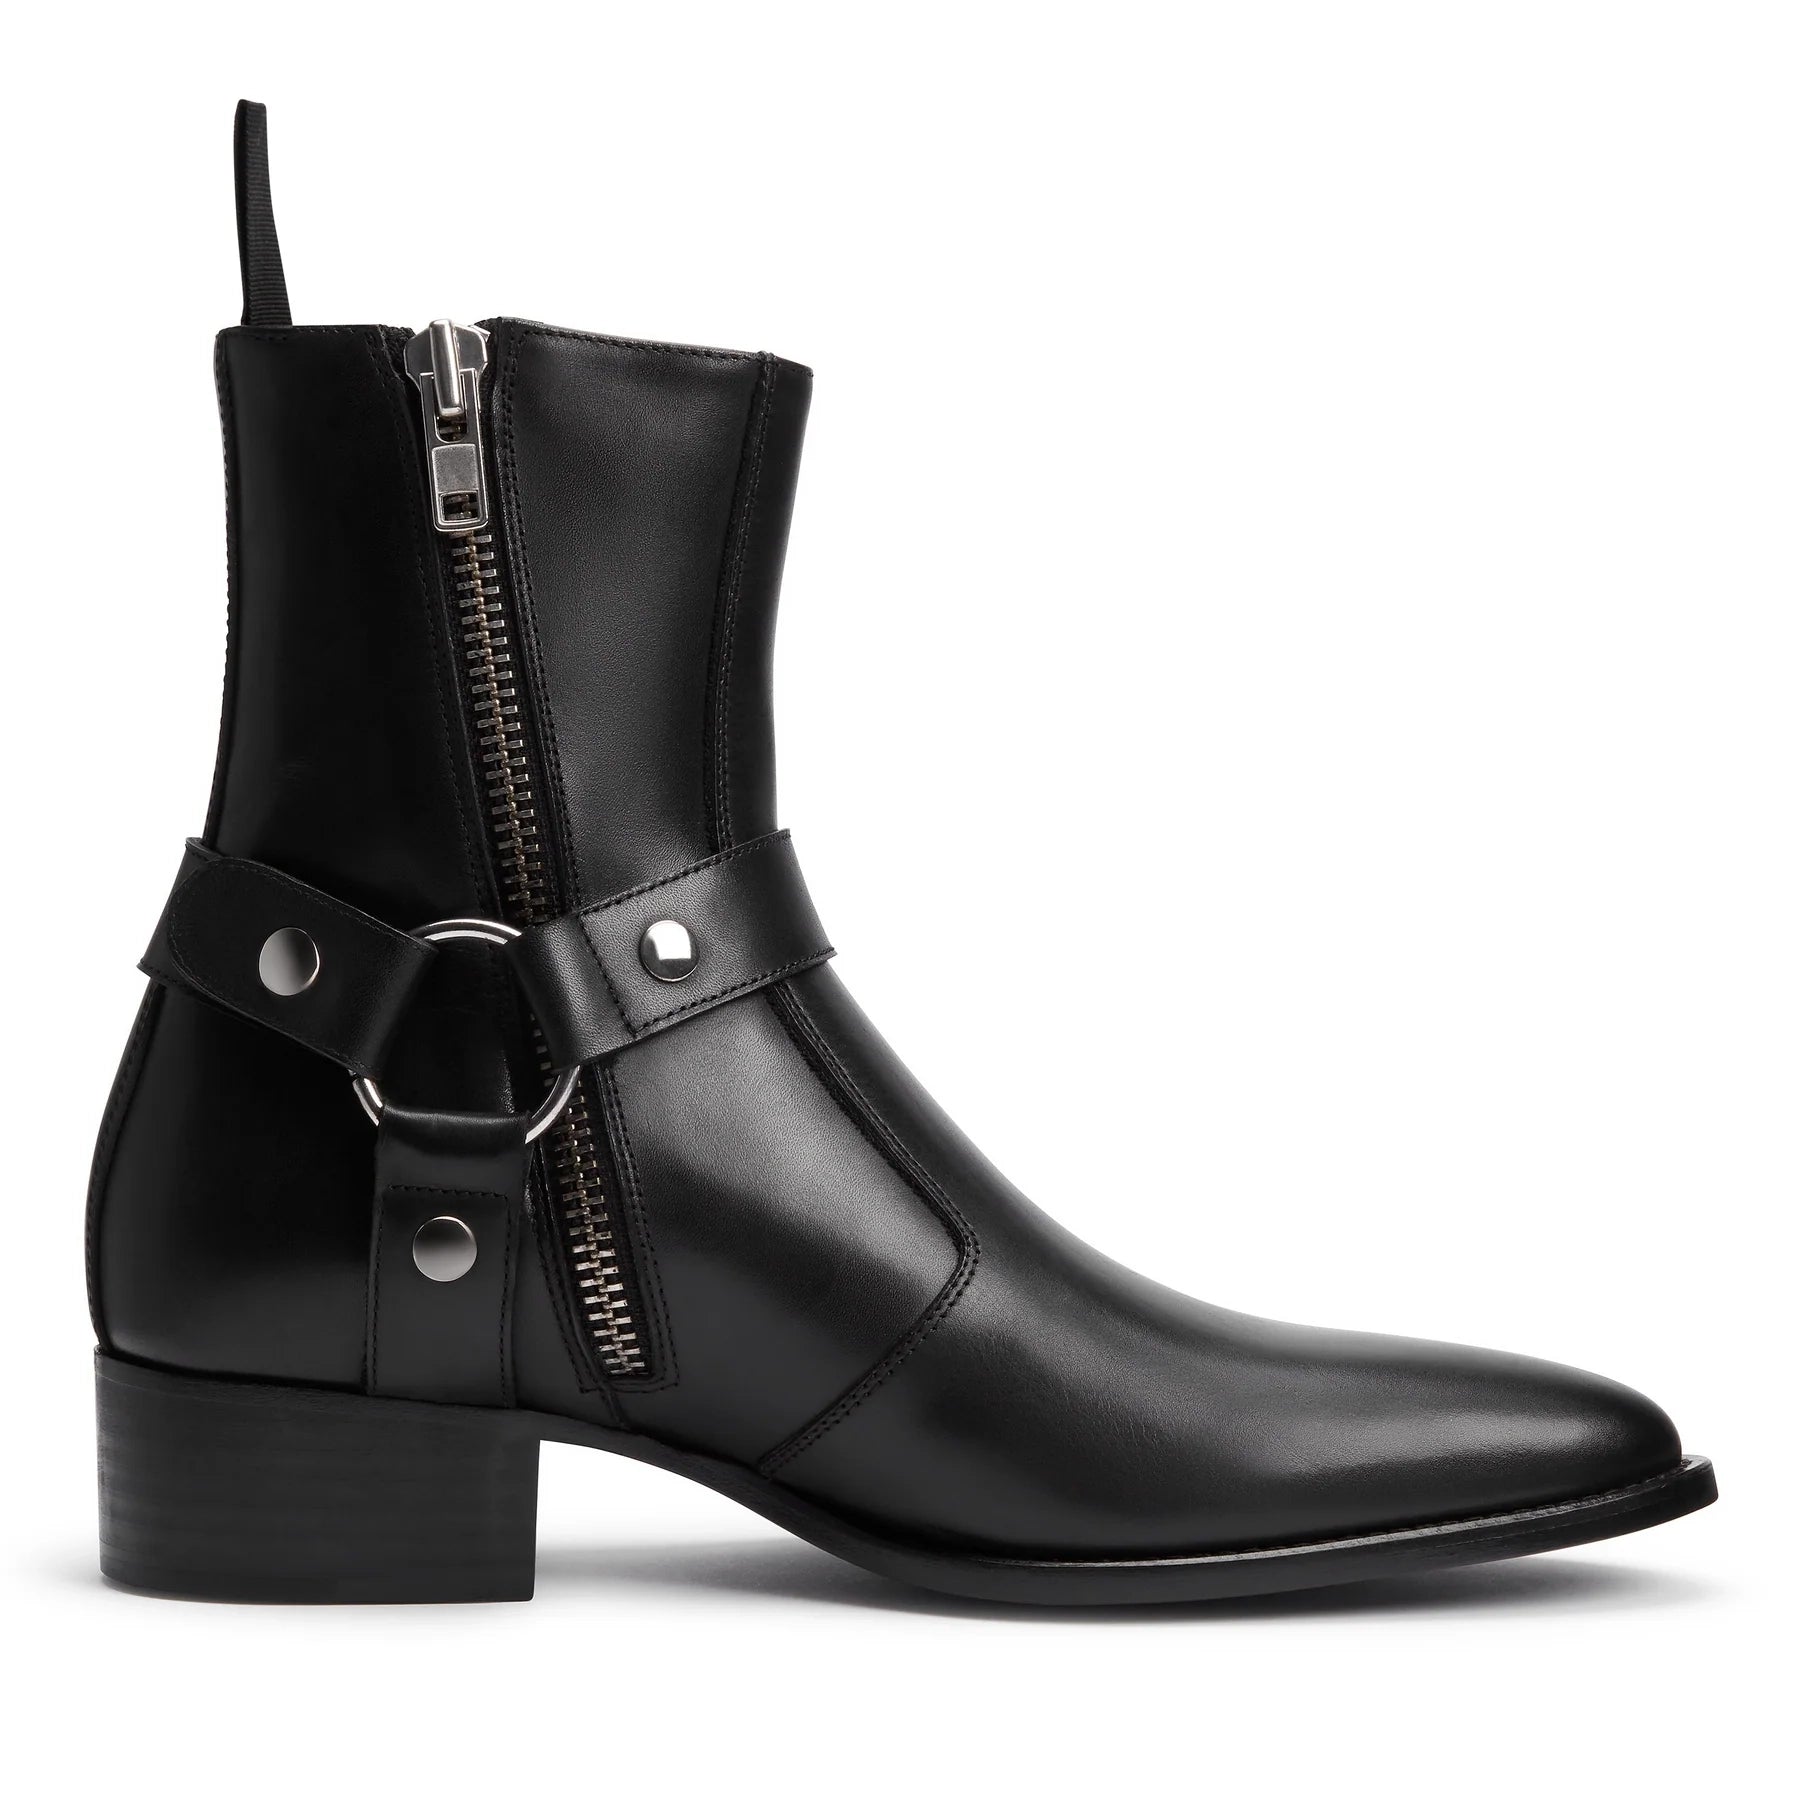 Harness Zip Boot - Black Leather